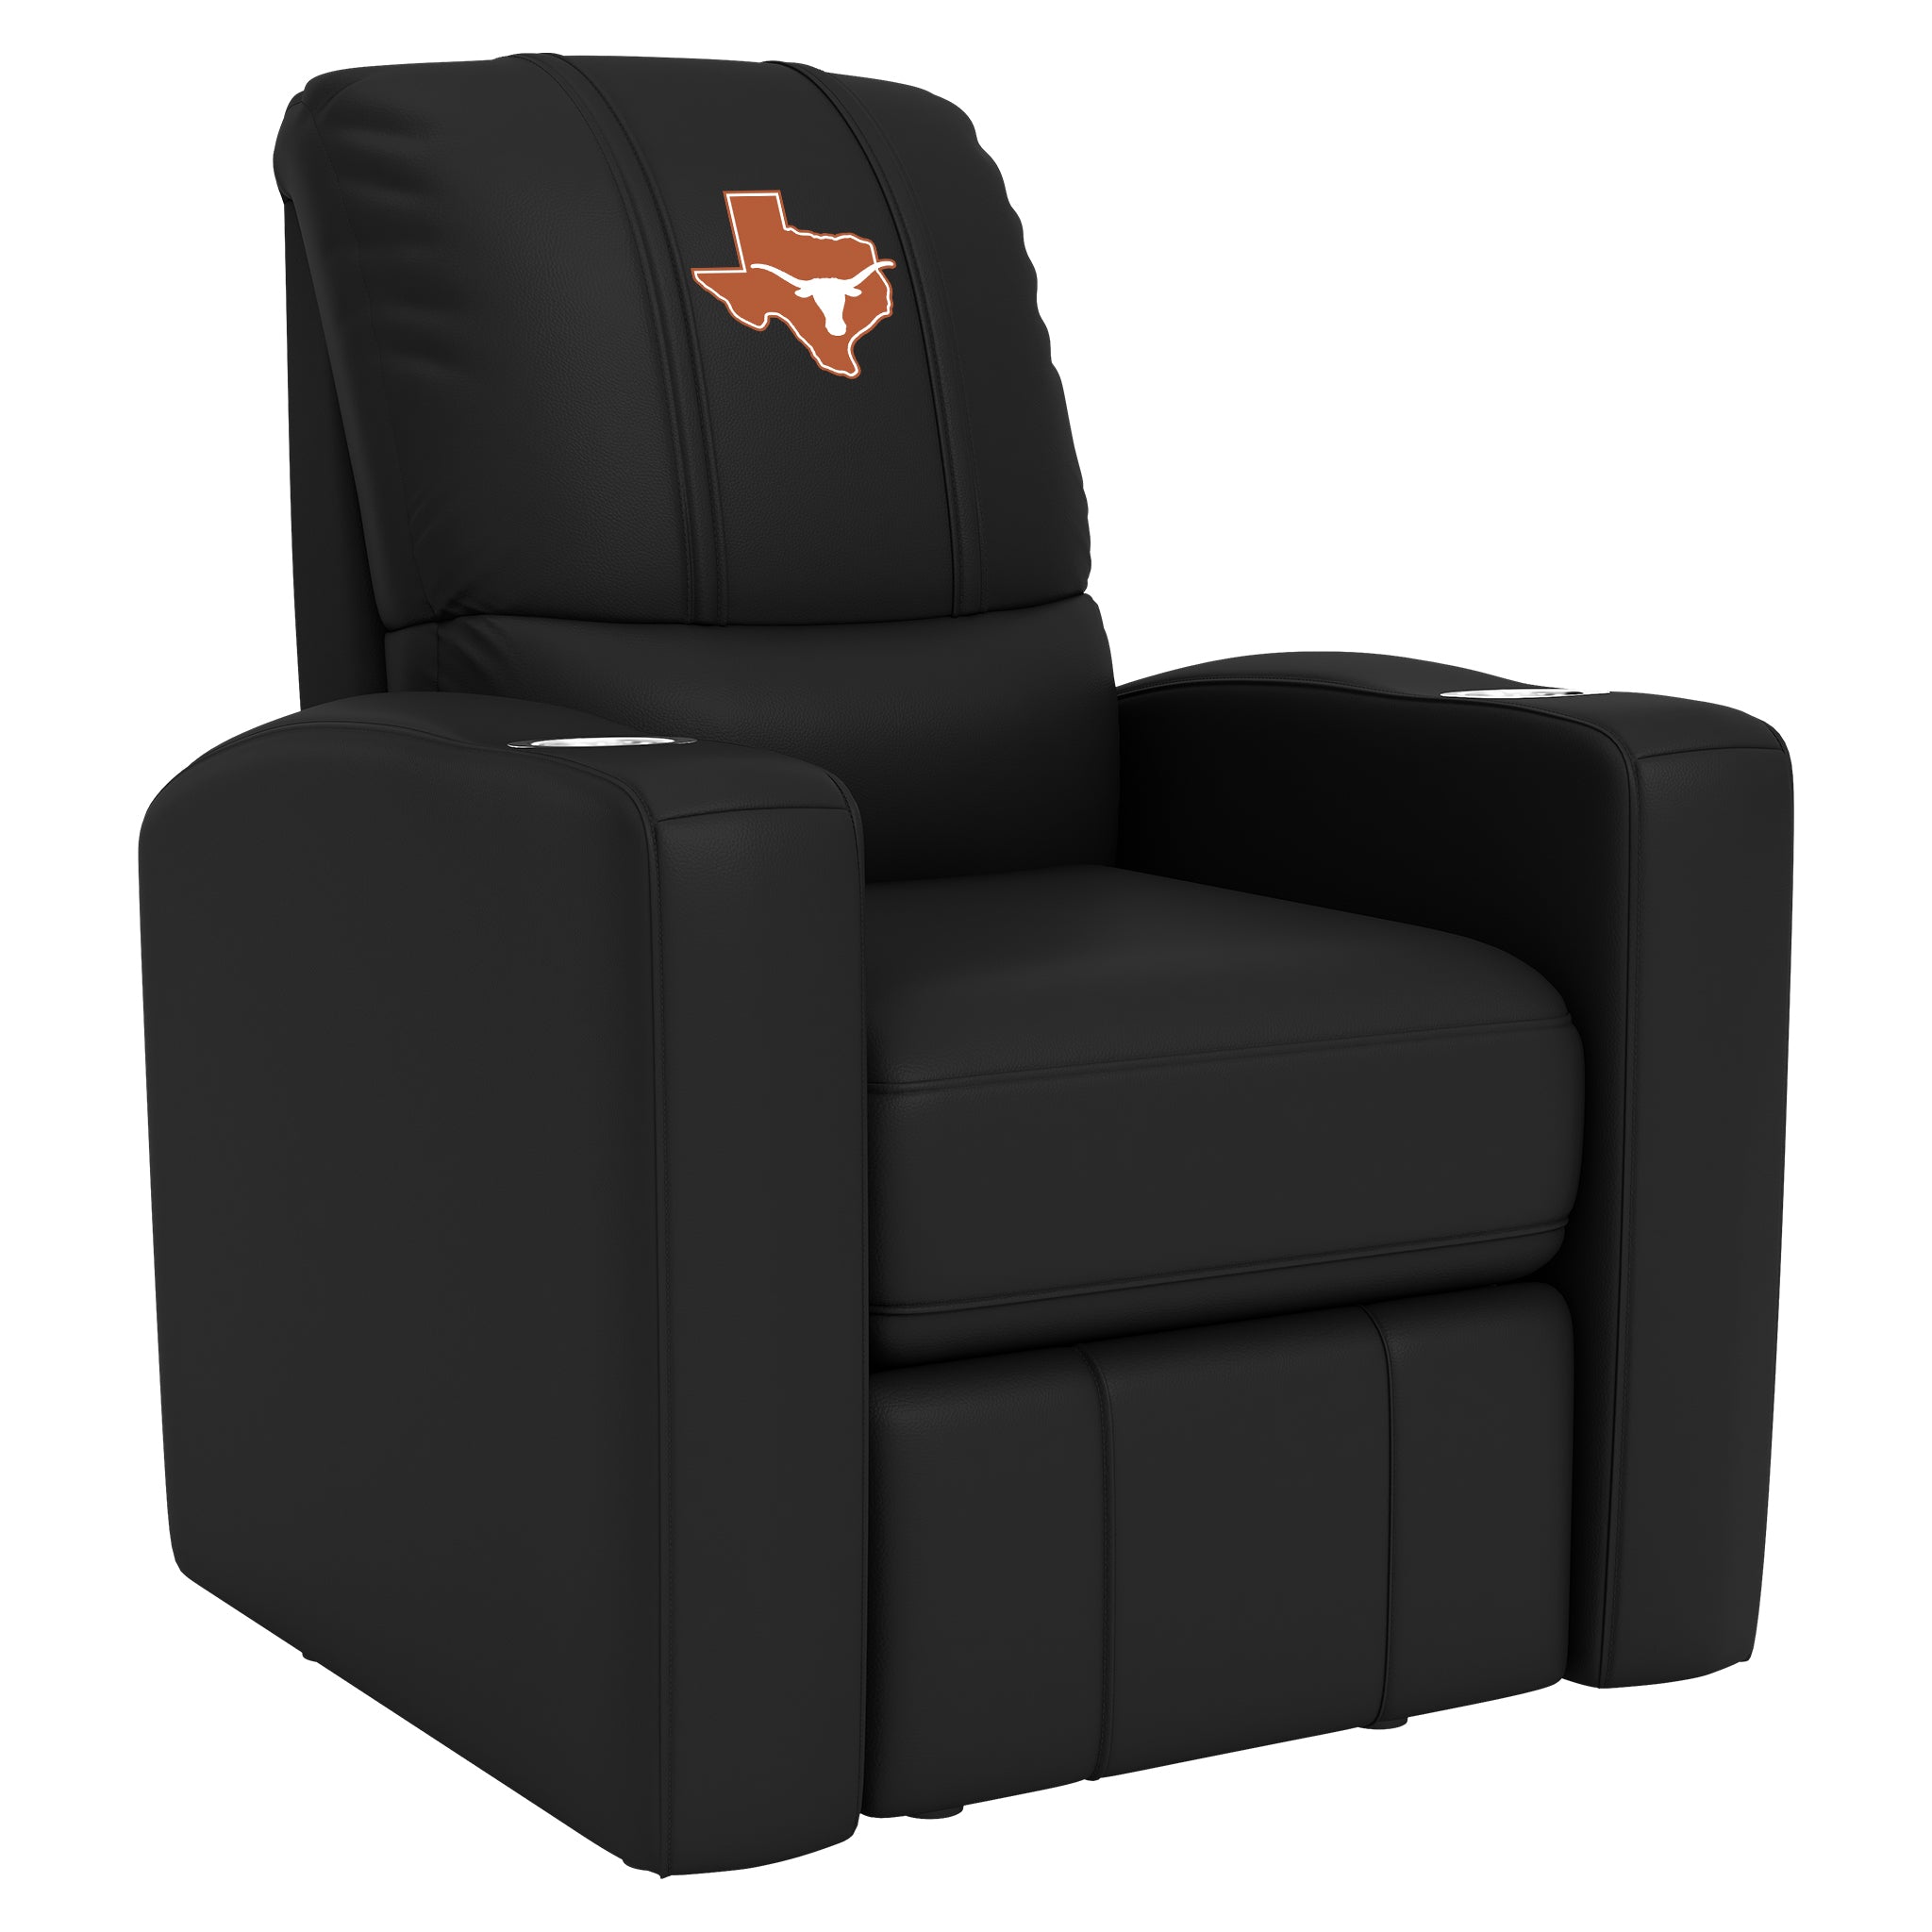 Texas Longhorns Stealth Recliner with Texas Longhorns Secondary